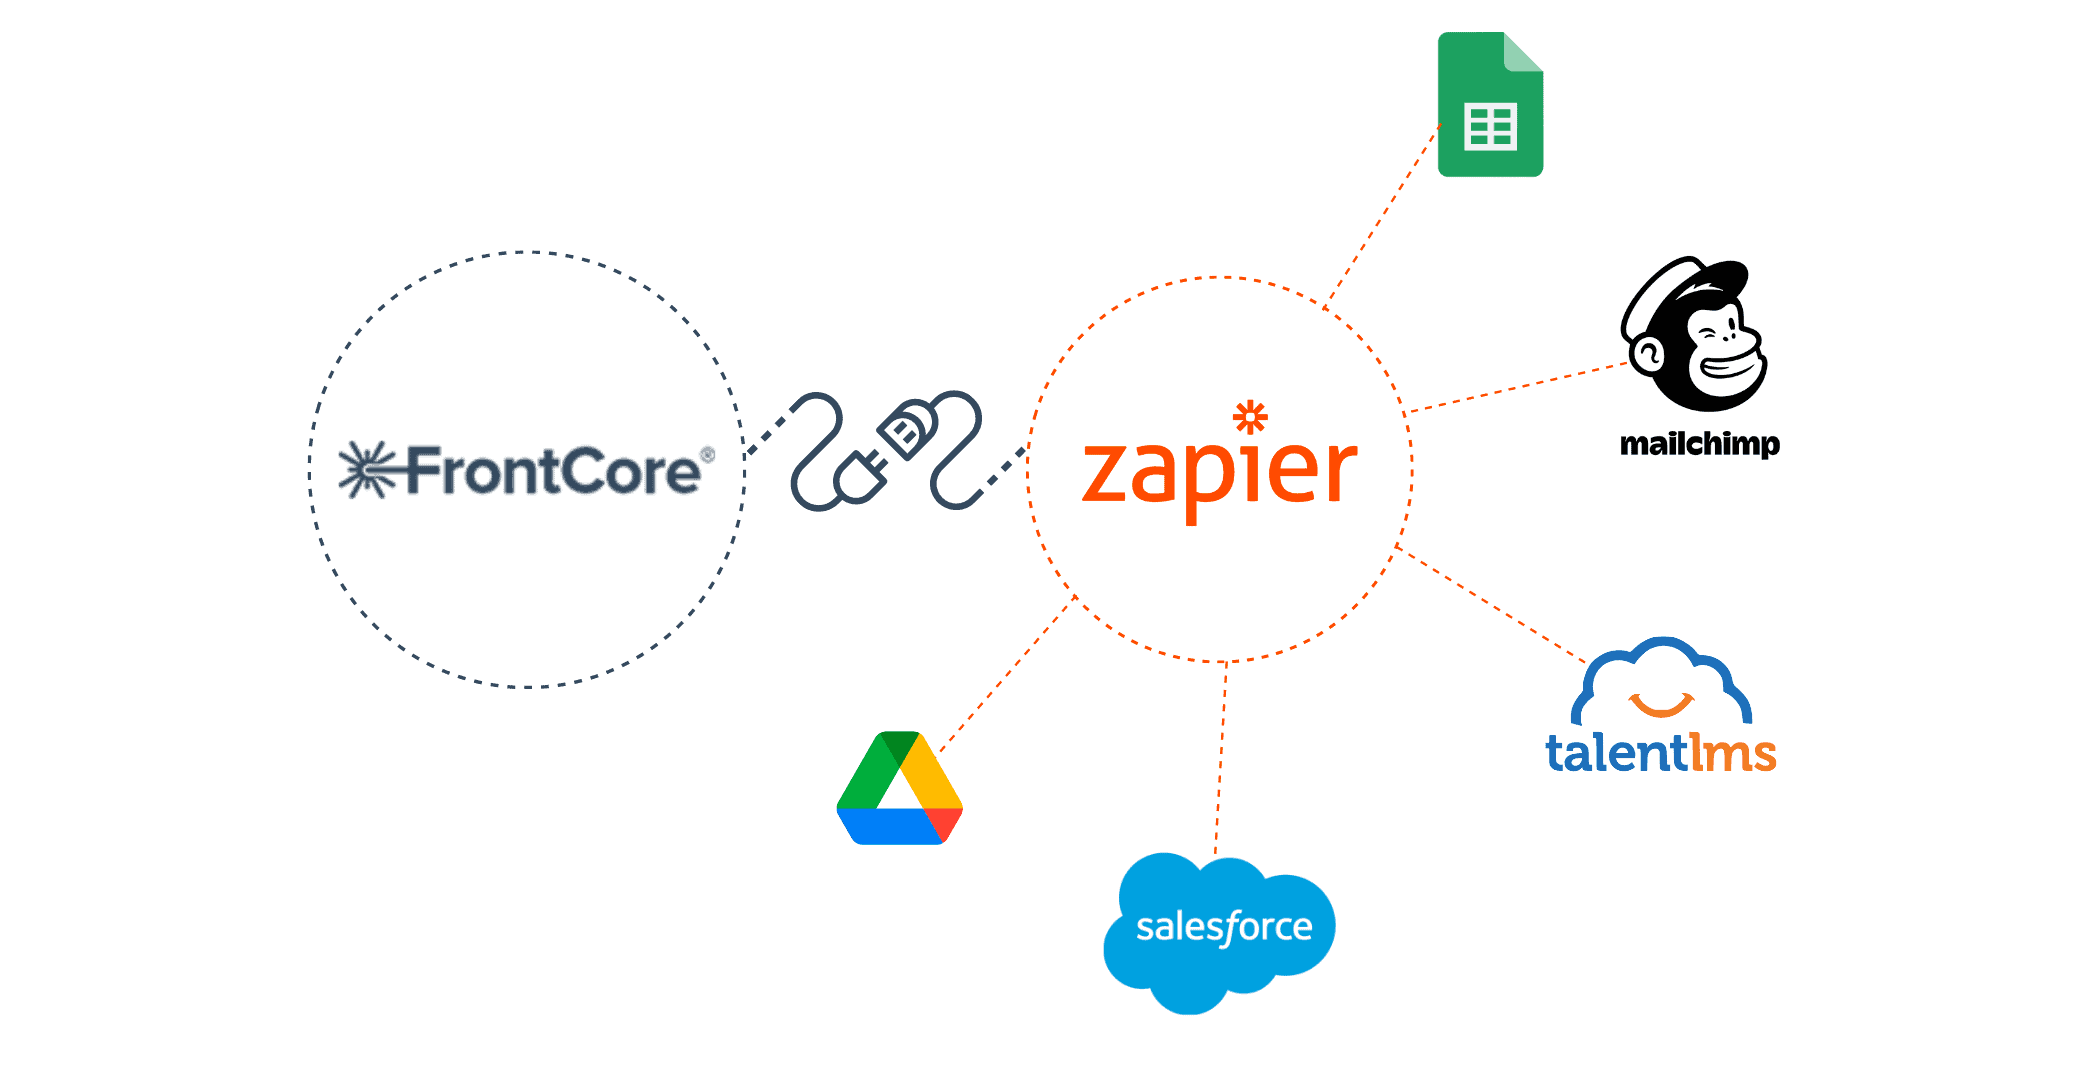 FrontCore Zapier integration opportunities illustrated